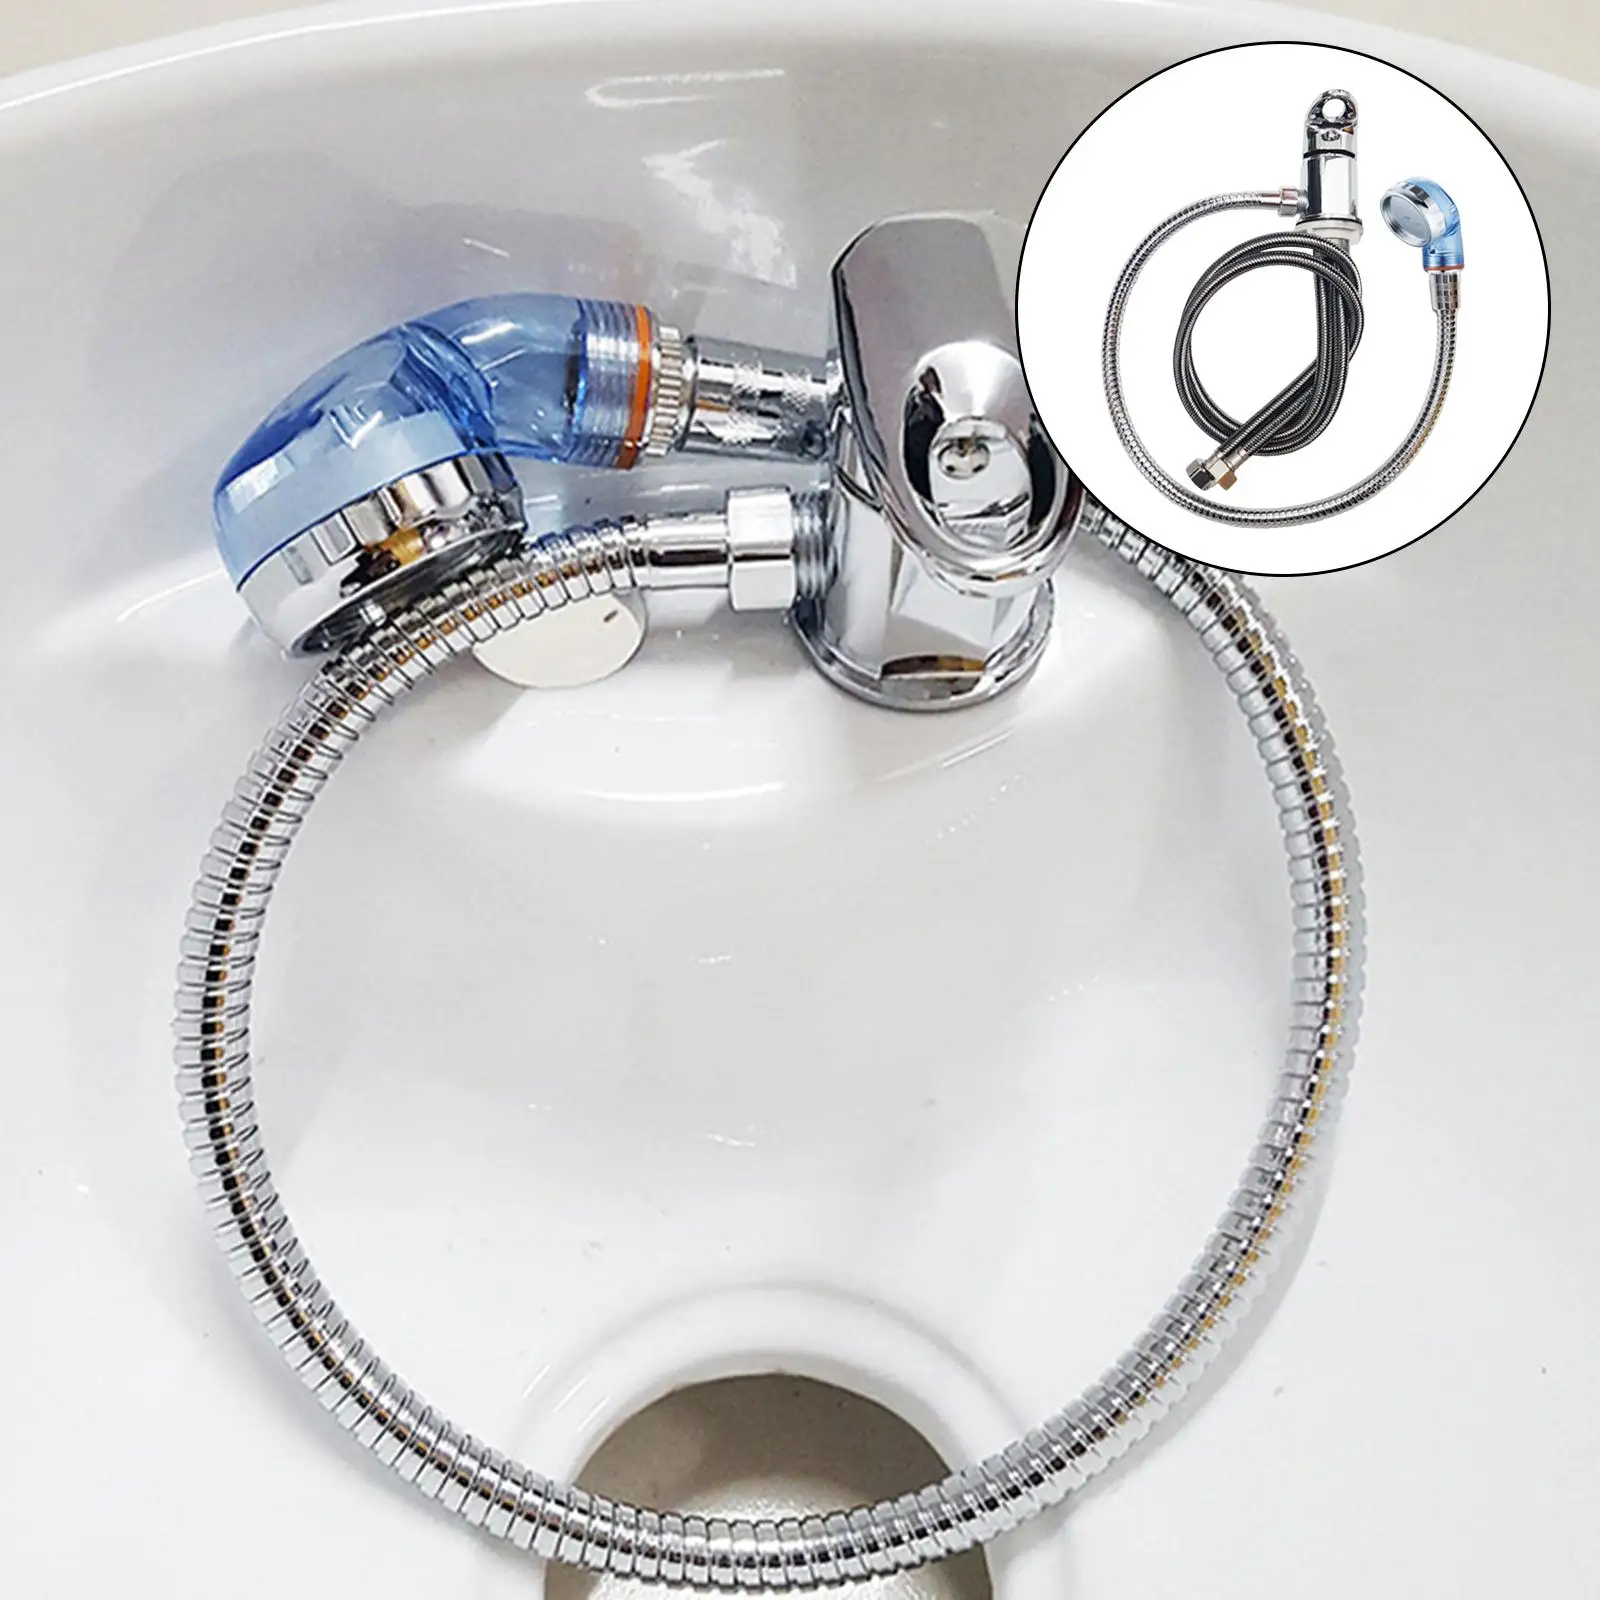 Salon Water Faucet Set,Zinc alloy Salon Shampoo Bowl Faucet and Sprayer Kit,with Hose size:Water faucet set Durable Salon Spa Hot Cold Mixer,Waterproof splash，Easy to control water temperature 